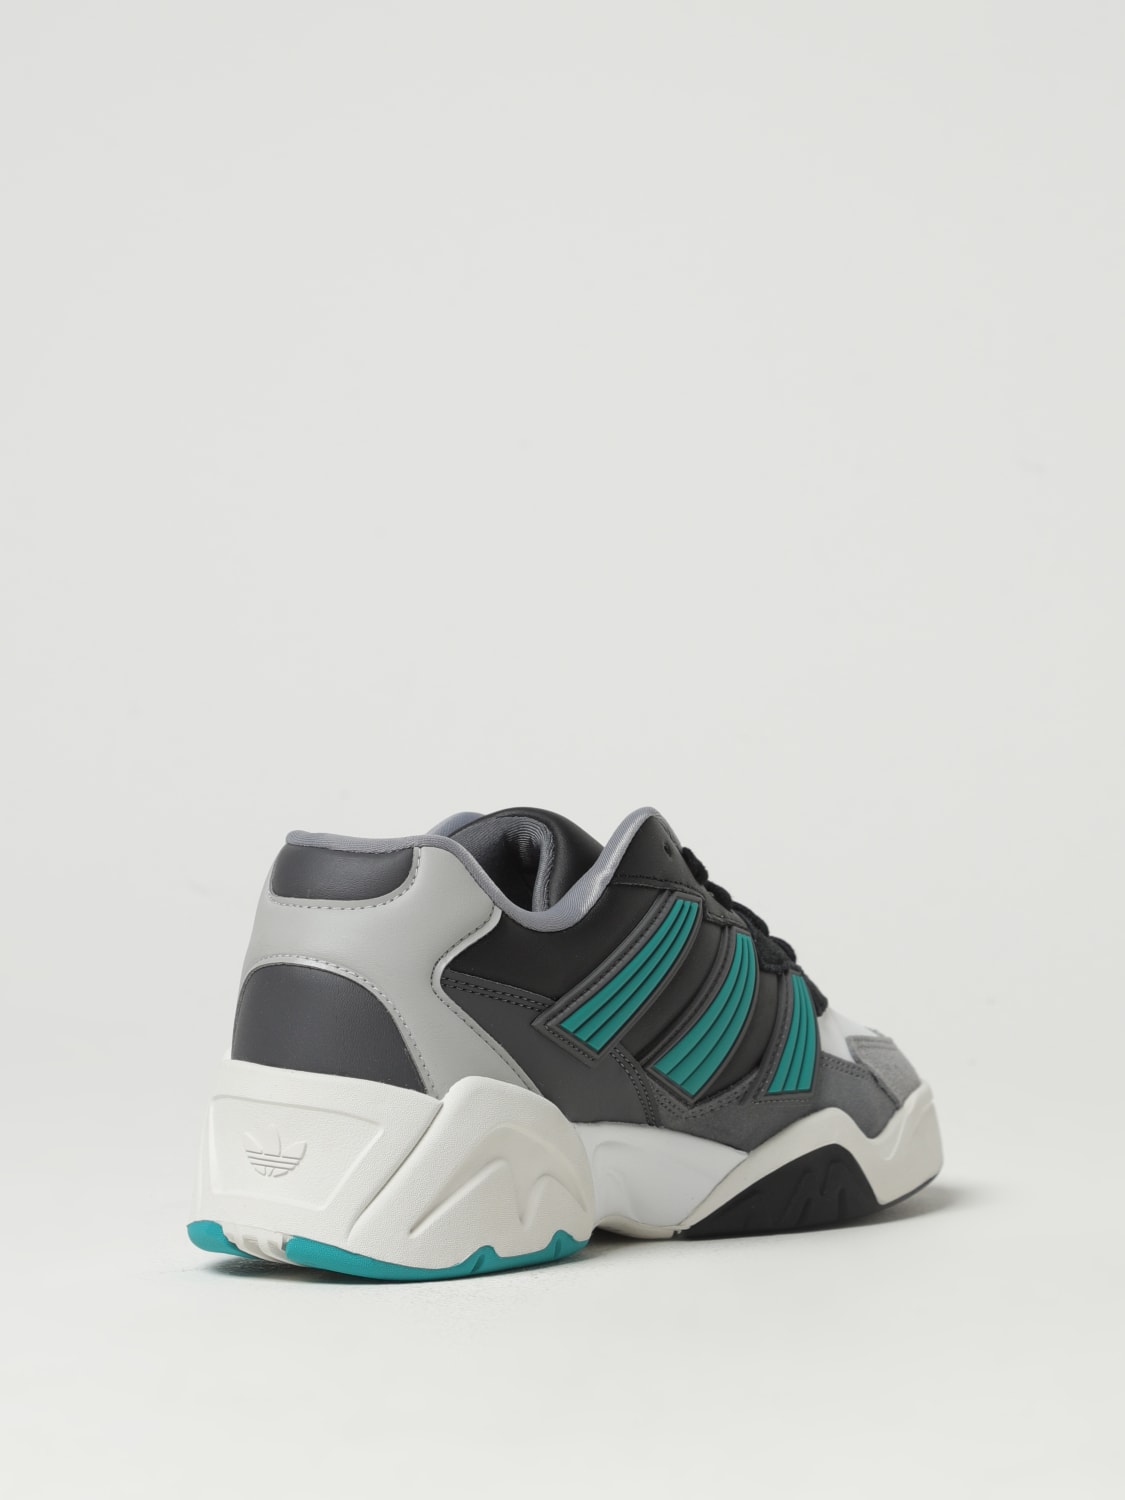 - sneakers sneakers Magnetic Grey Court rubber Originals in ORIGINALS: online Adidas leather and IF5378 ADIDAS at |